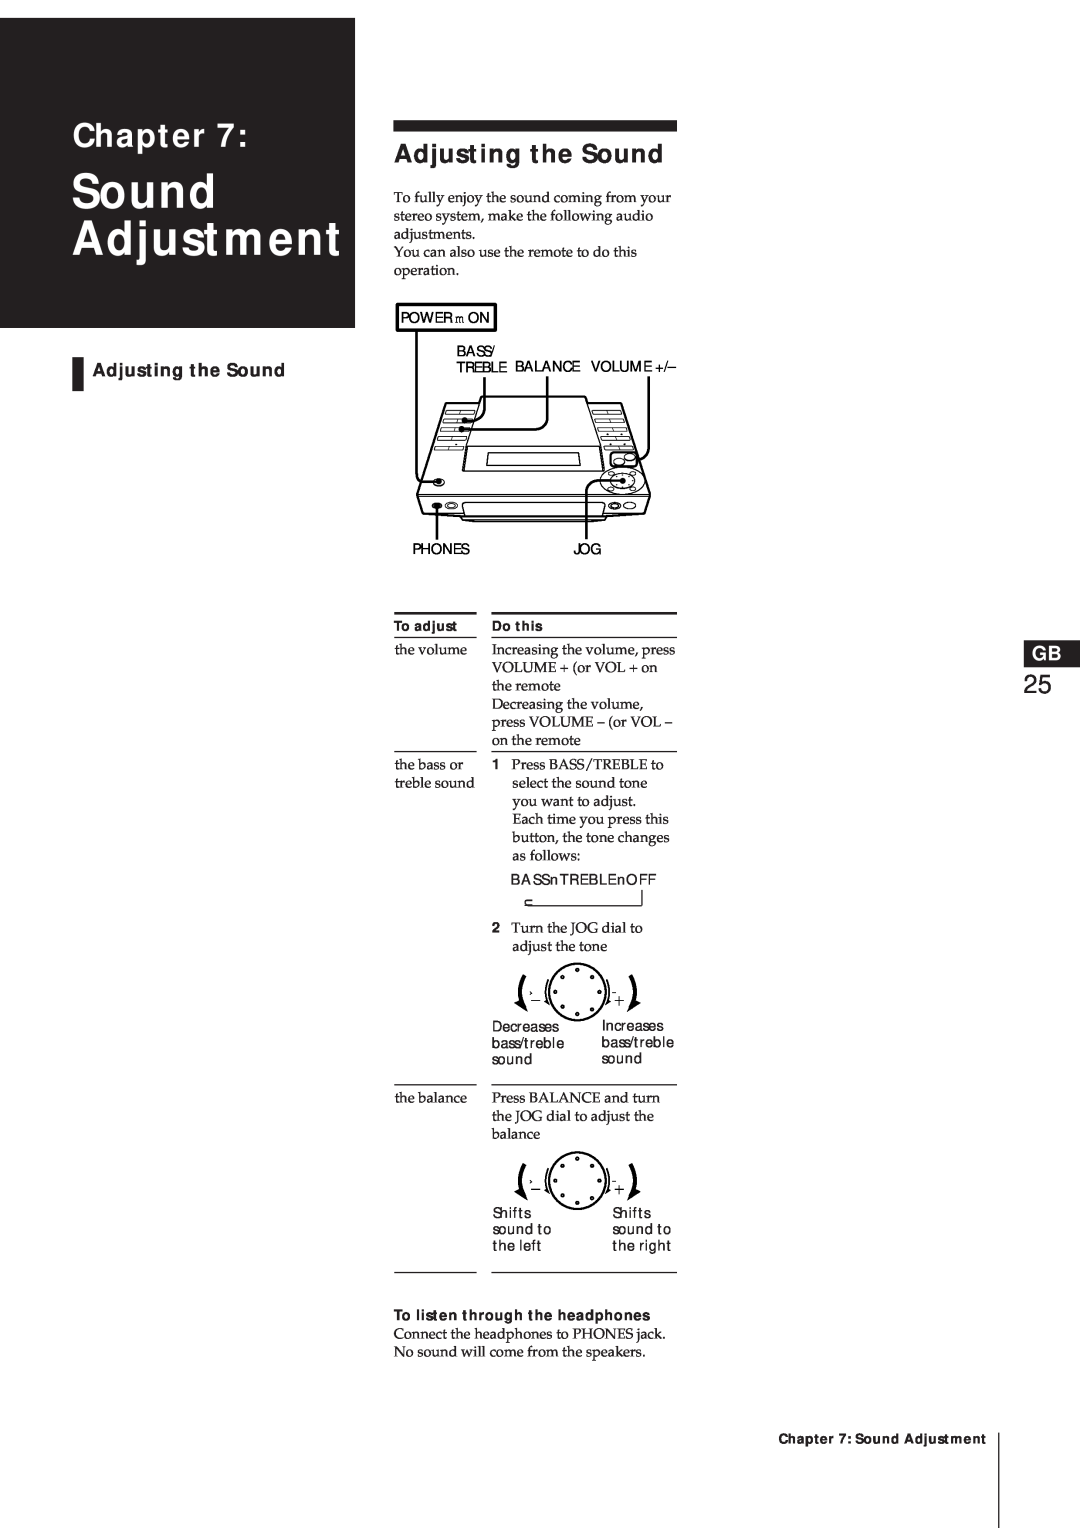 Sony MJ-L1A manual Sound Adjustment, Adjusting the Sound, Chapter, To listen through the headphones 